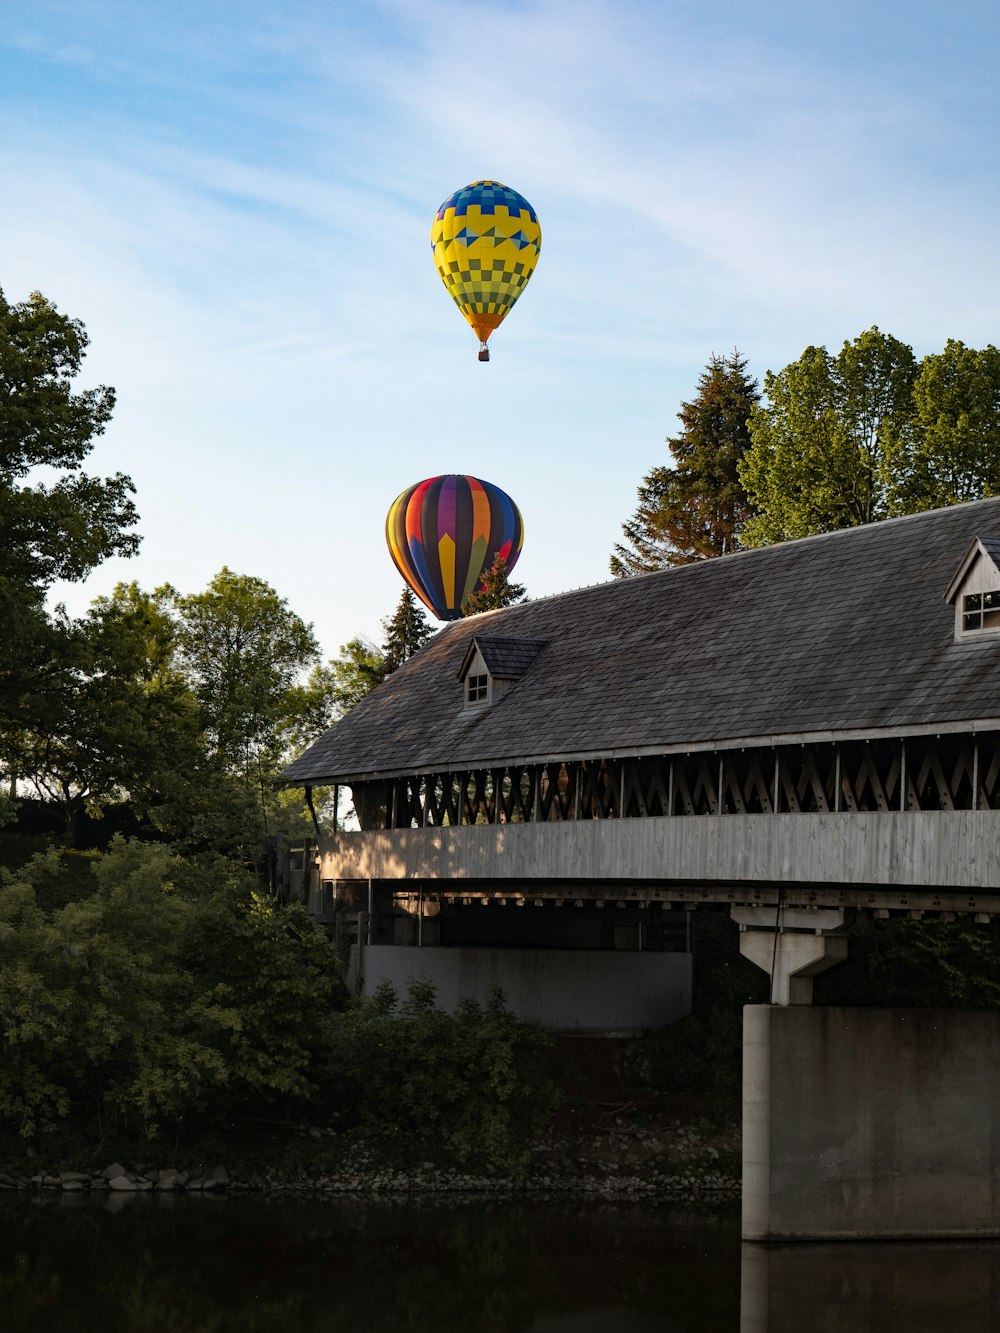 two hot air balloons during daytime